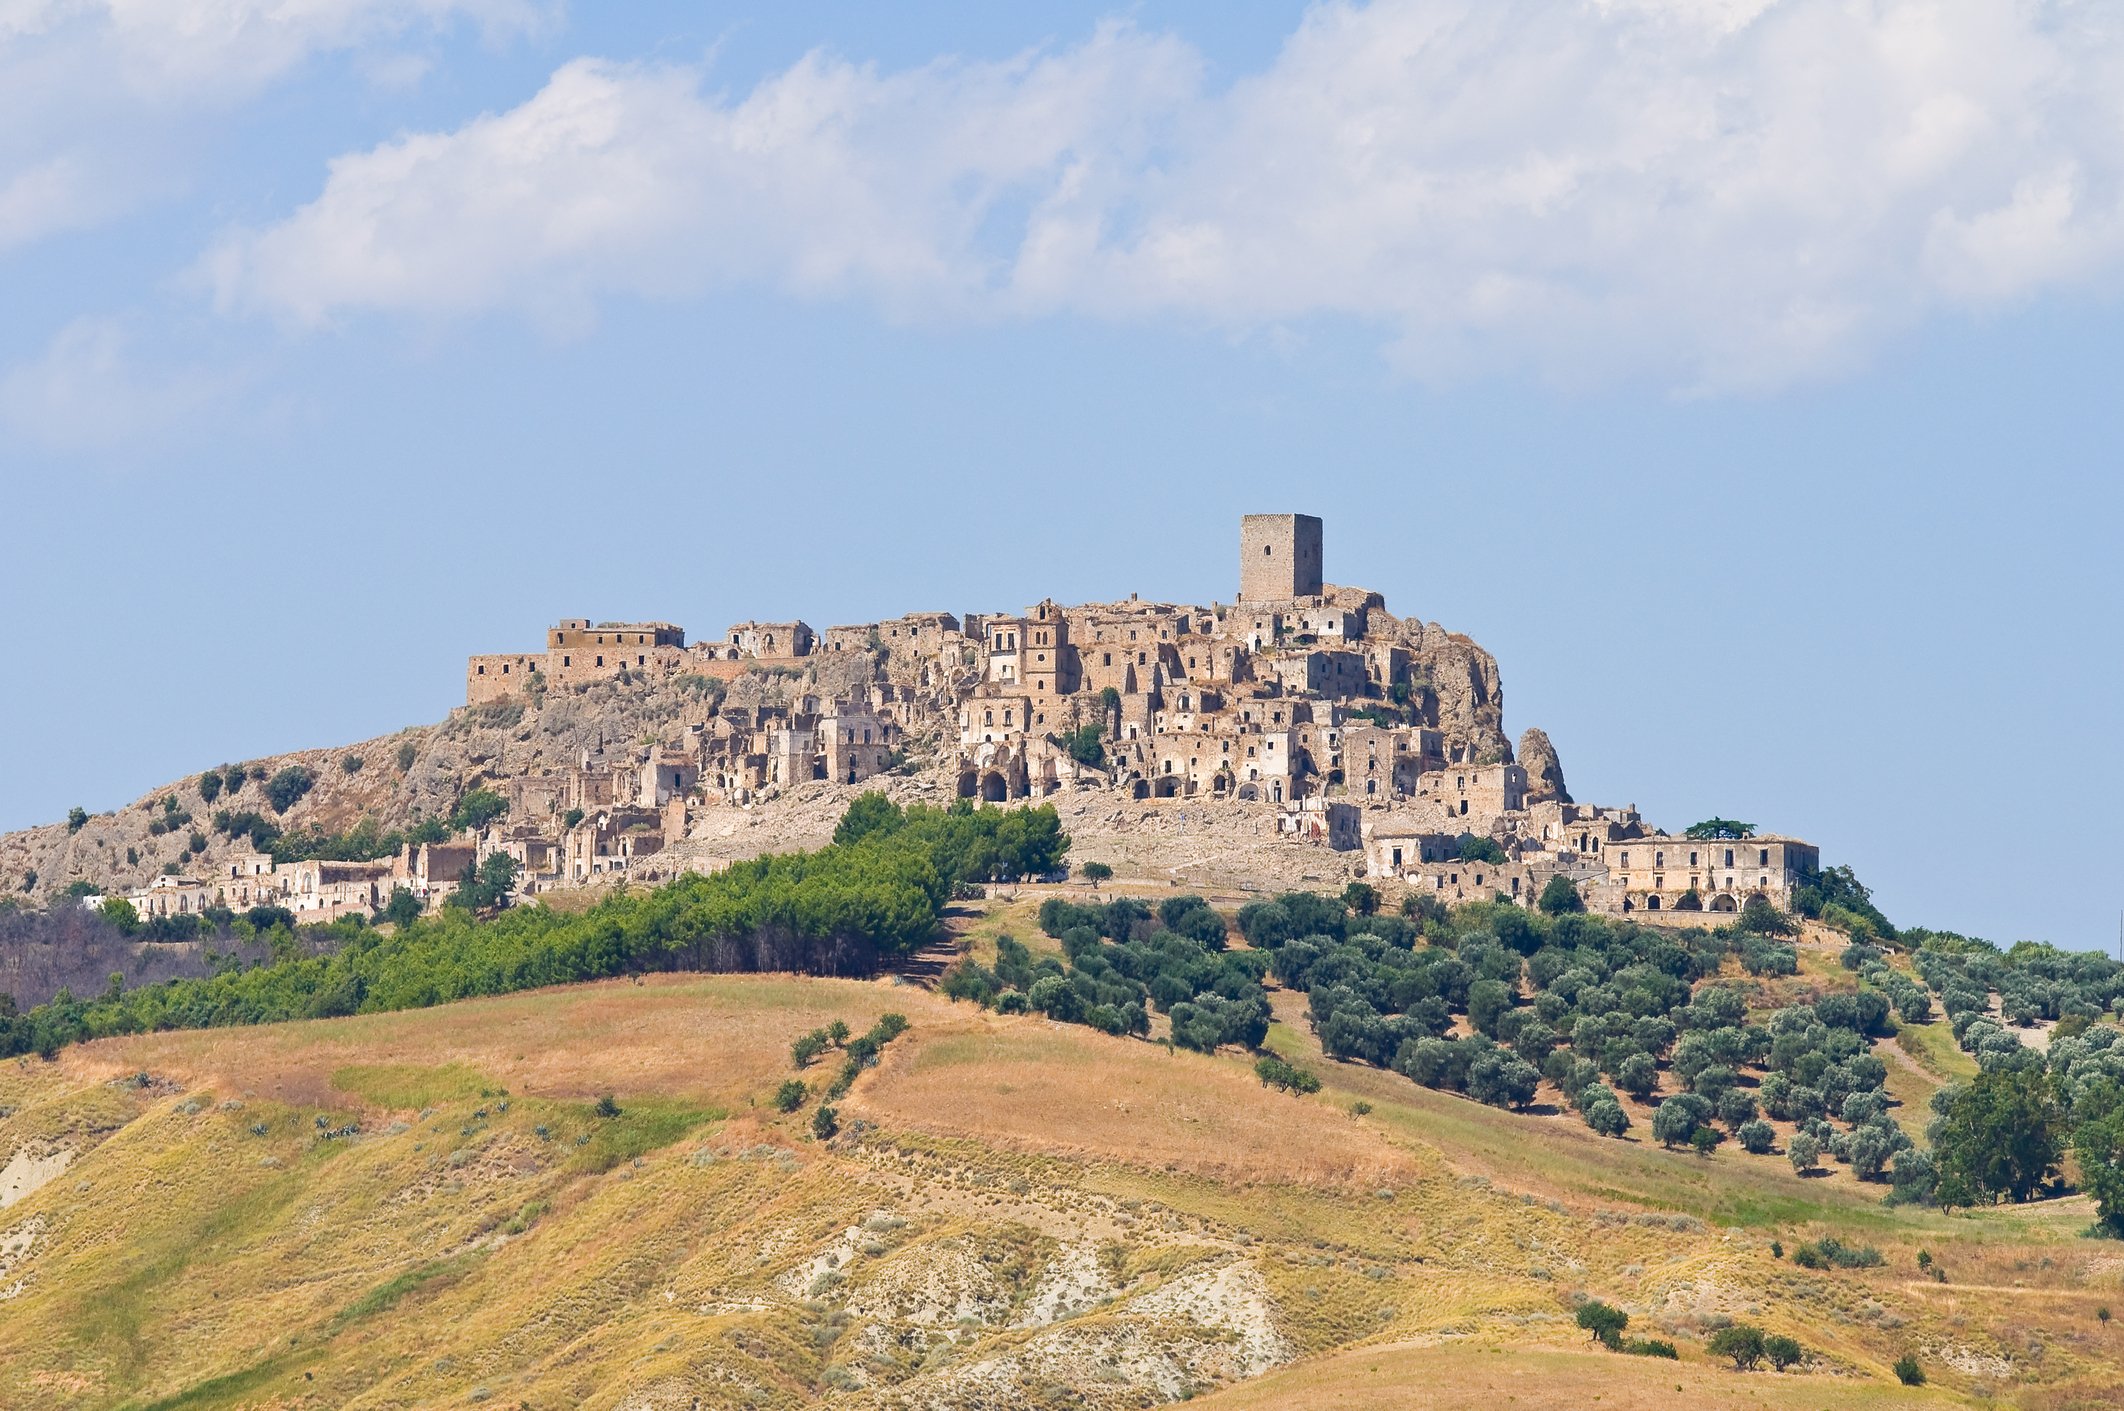 dreamstime_m_45886894 Craco panorma by Milla74.jpg